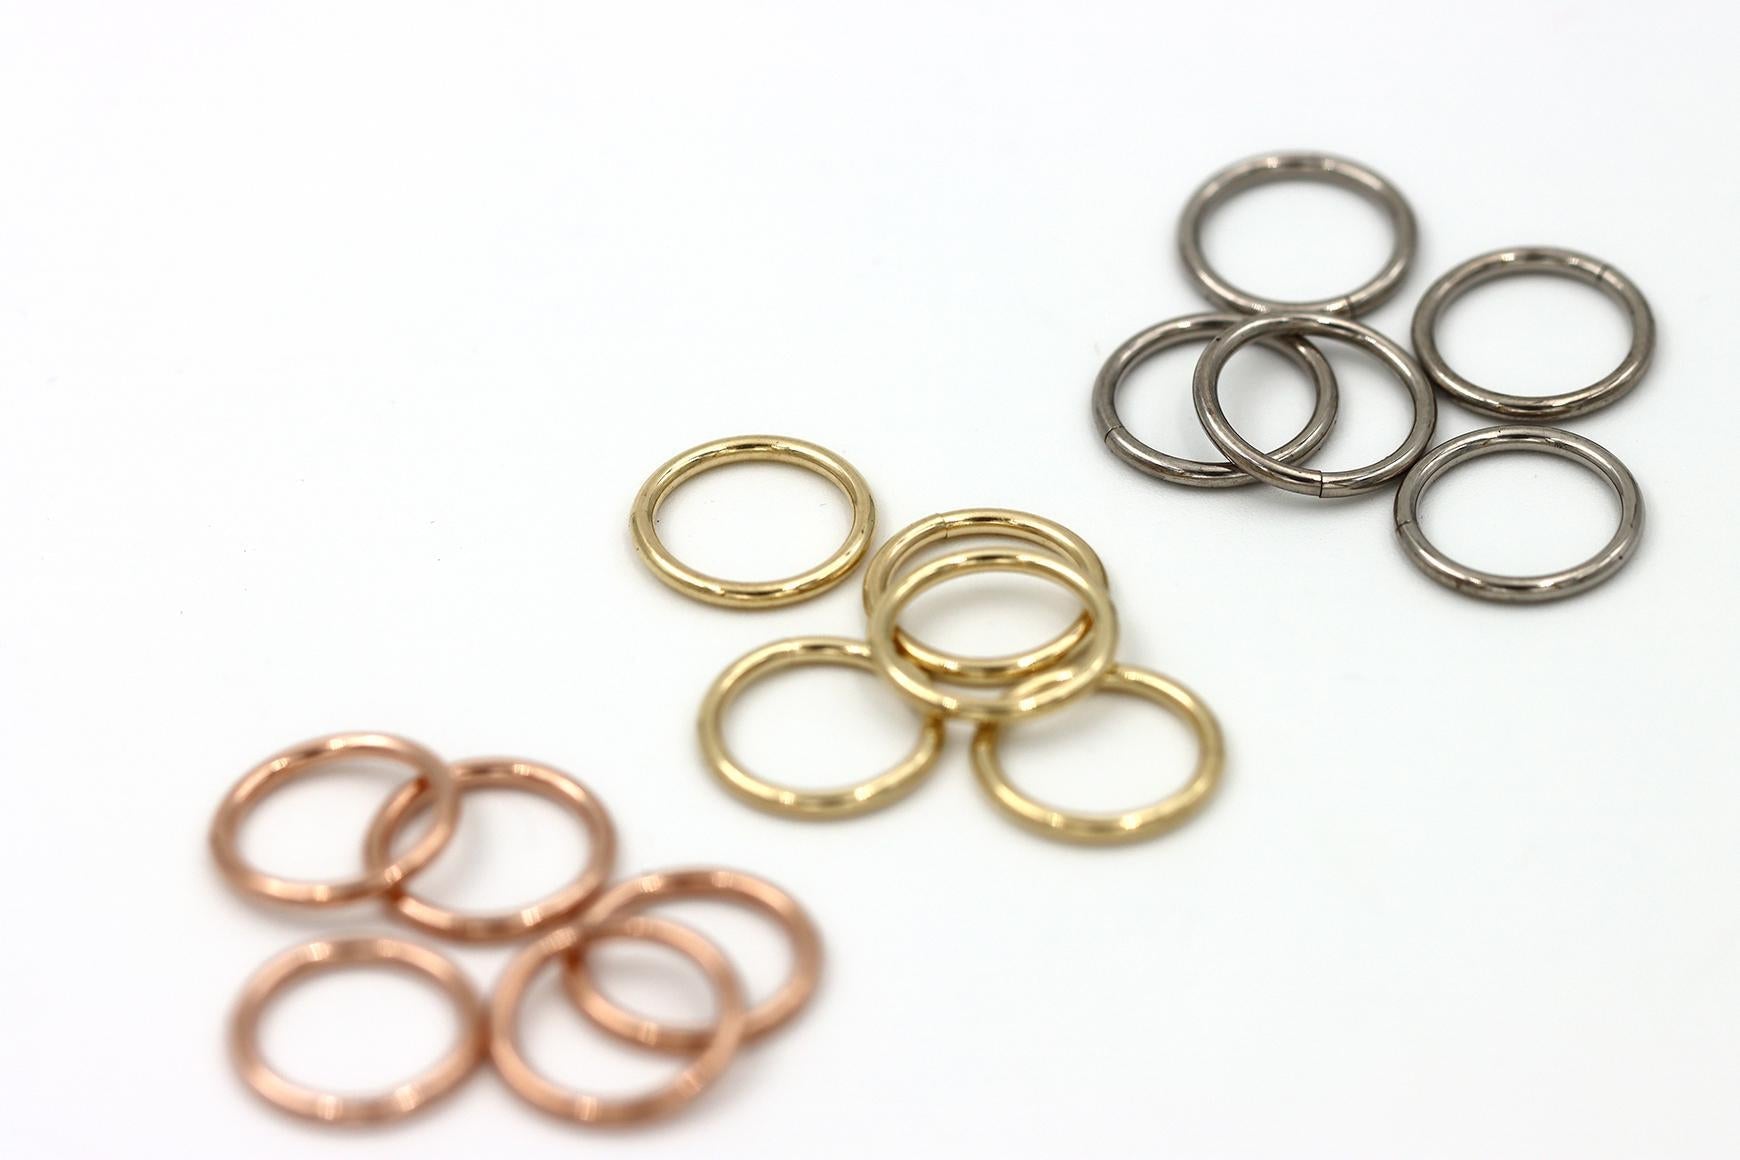 Gold Seam Rings - Cup and Divot